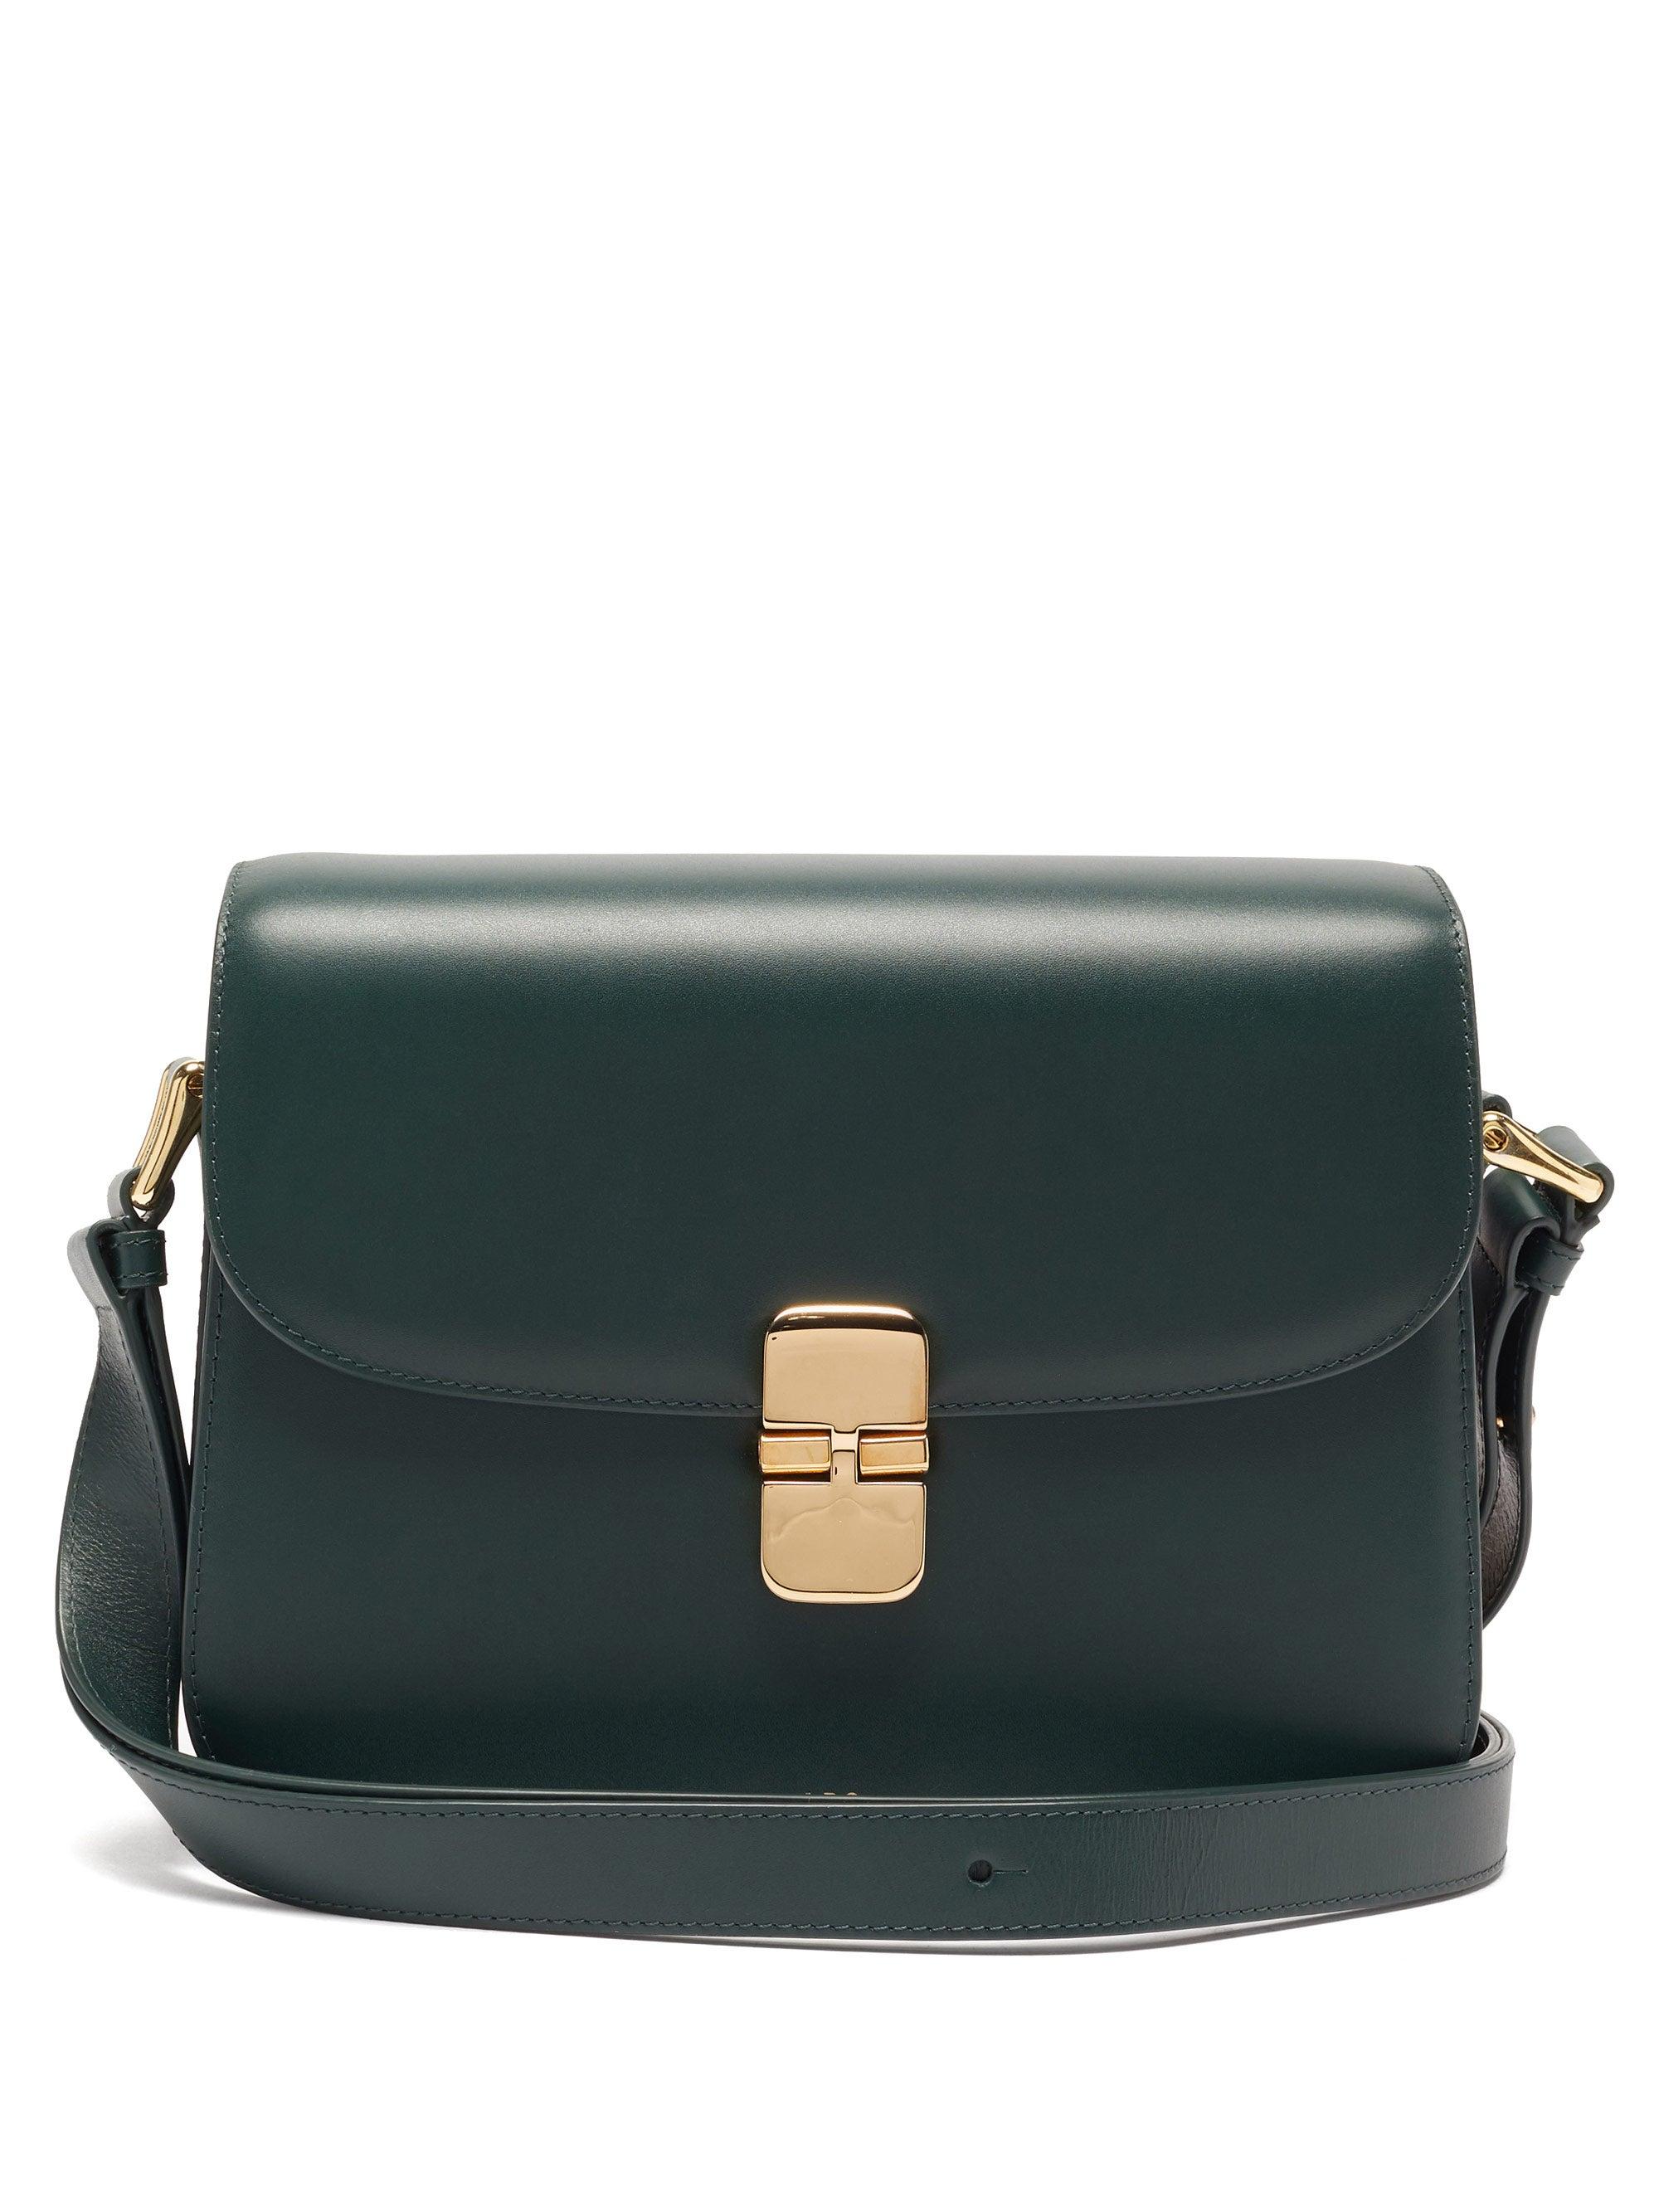 A.P.C. Grace Large Smooth-leather Cross-body Bag in Green | Lyst